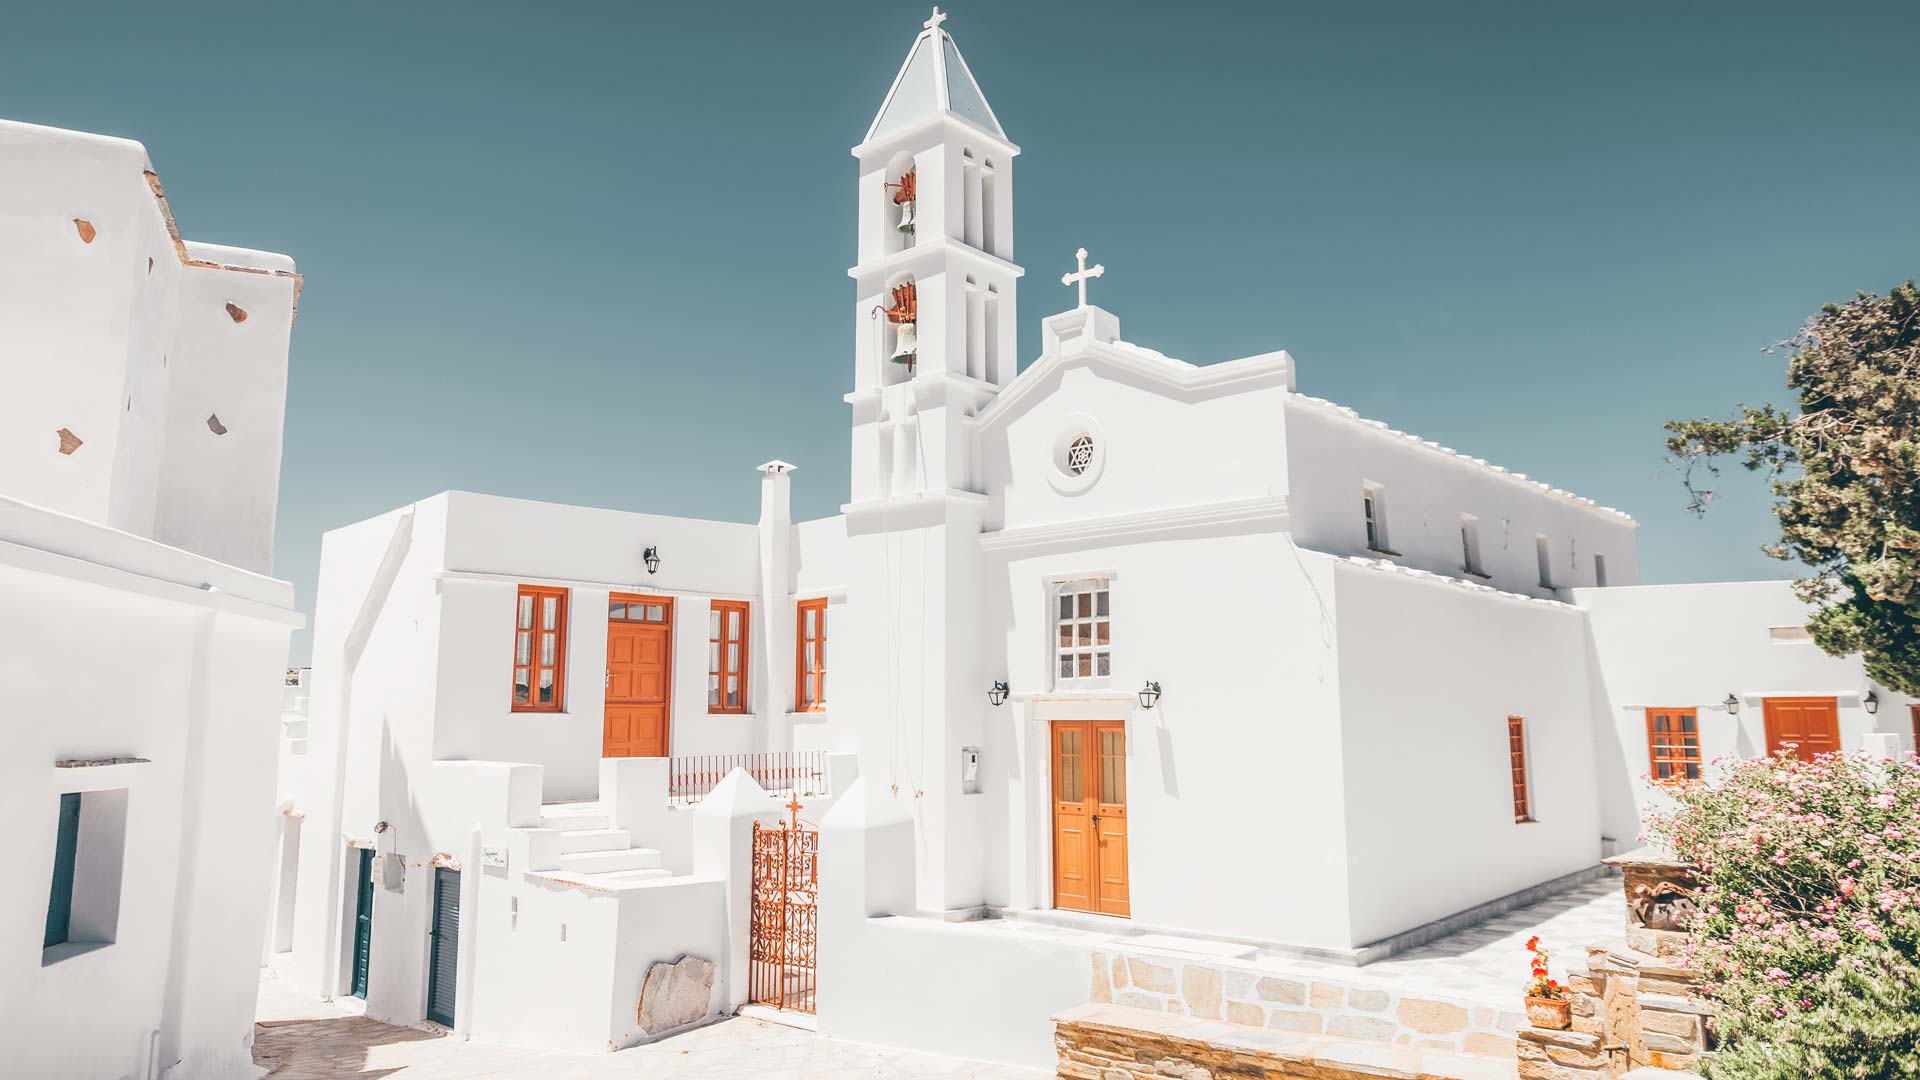 Pyrgos is the village of the artists located on the north side of the island